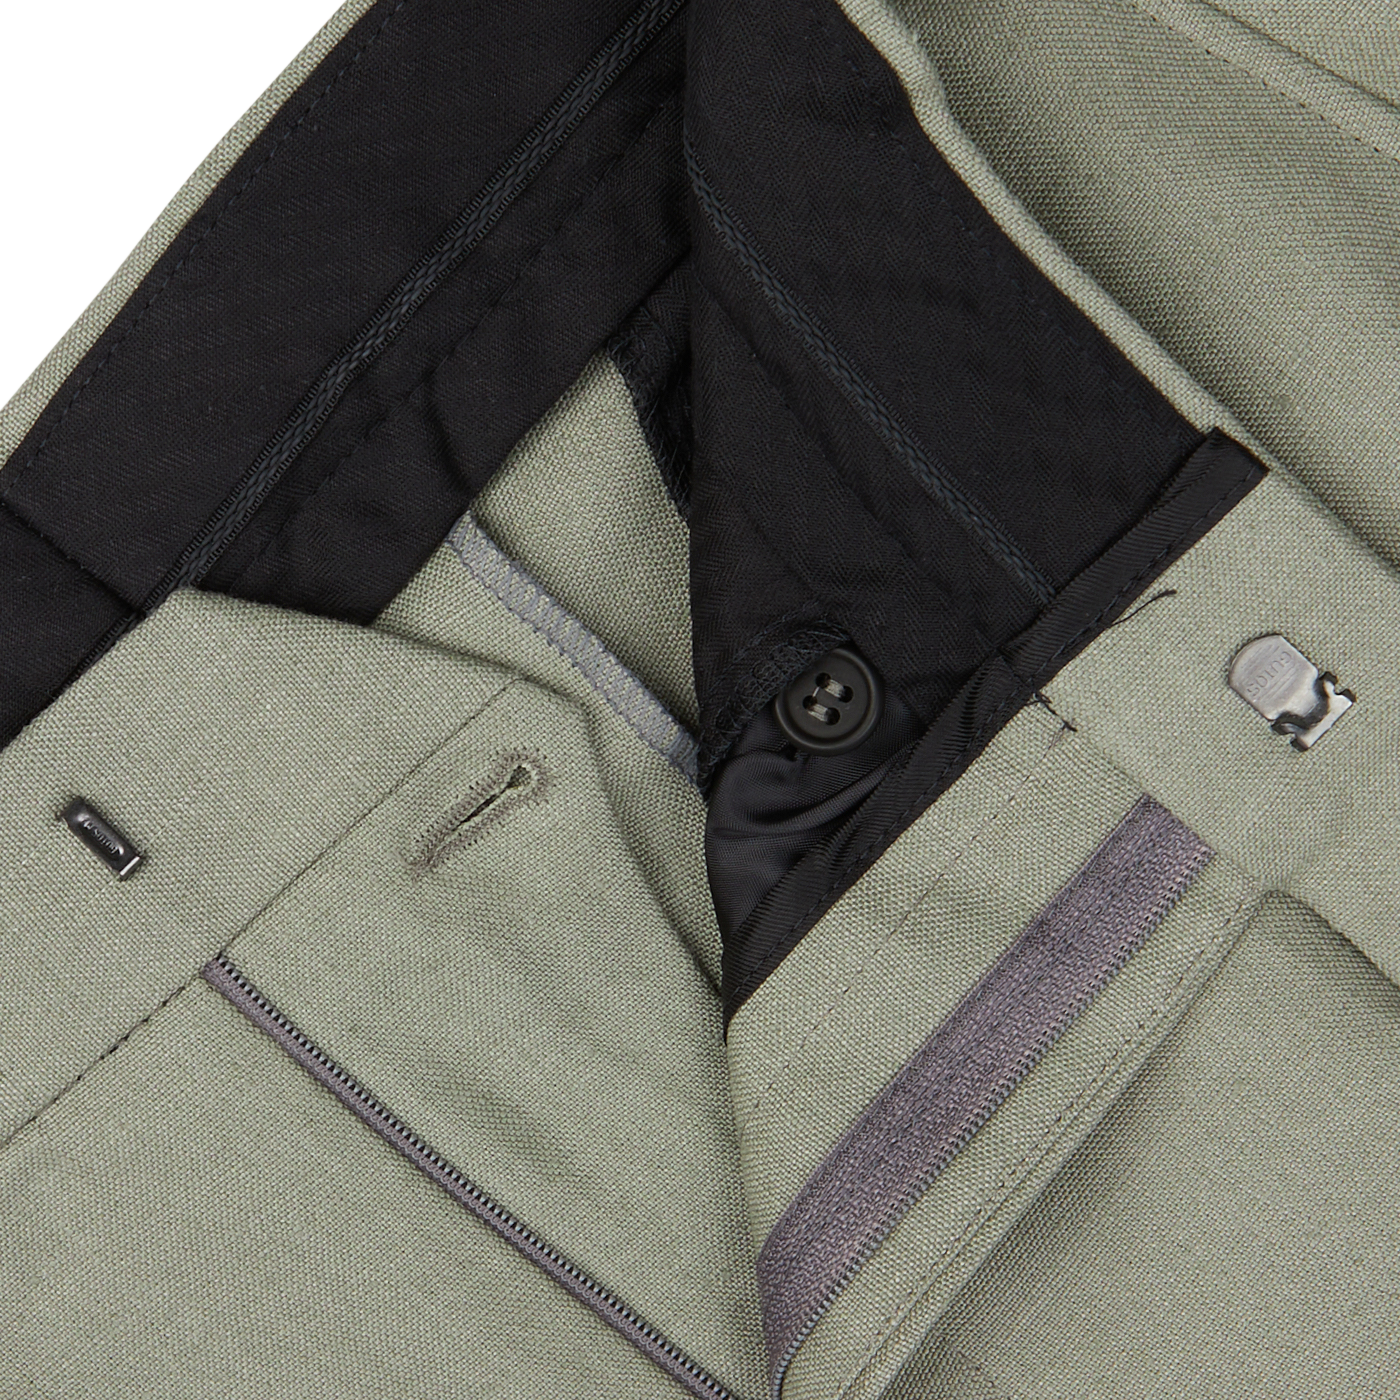 Close-up view of a Sage Green Canapa Hemp DB Suit showing the inside waistline, zipper, button, and fasteners by Studio 73.